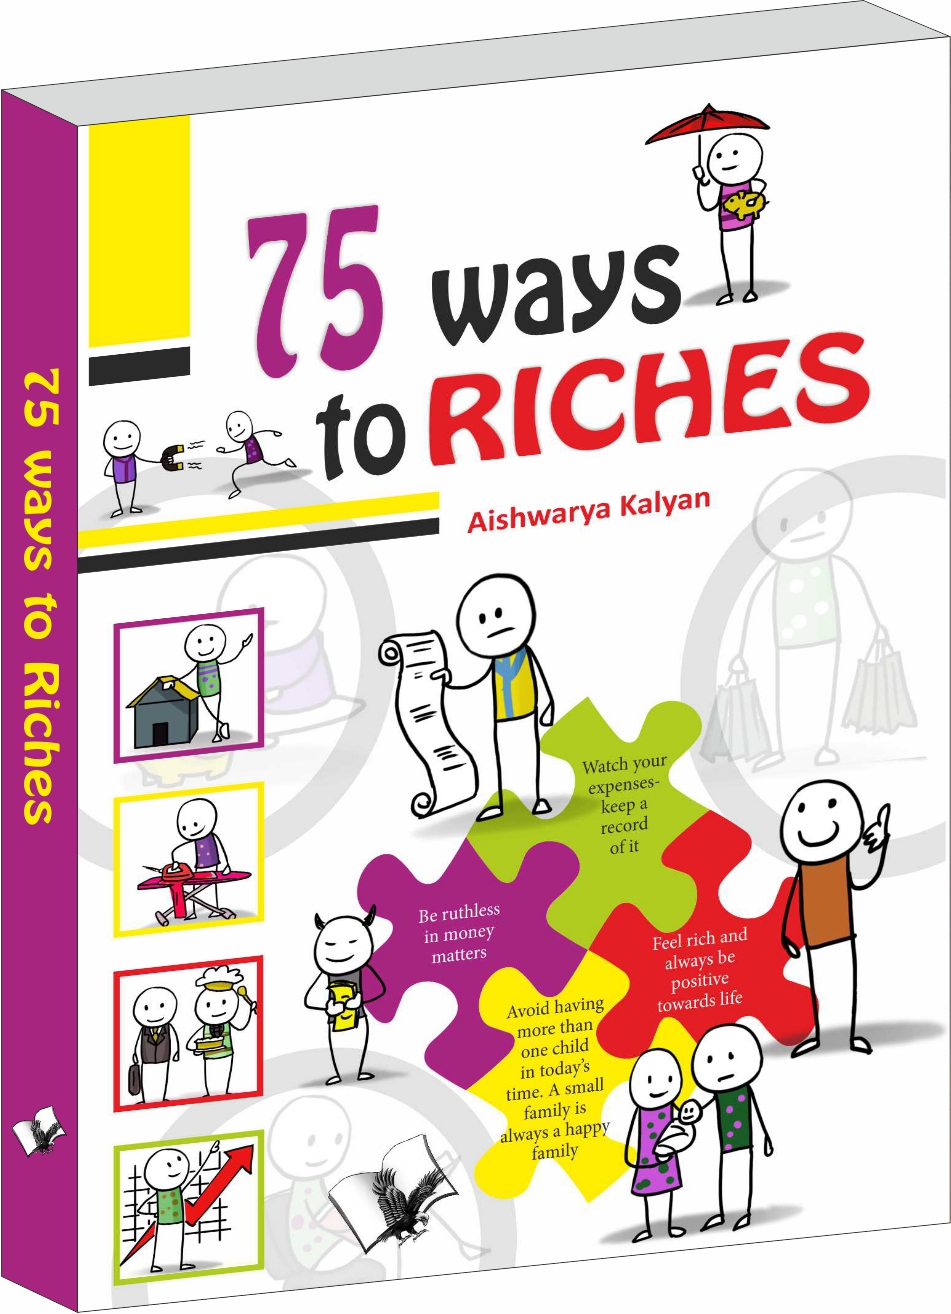 75-ways-to-riches-illustrated-with-one-liners-on-each-page-for-a-quick-read